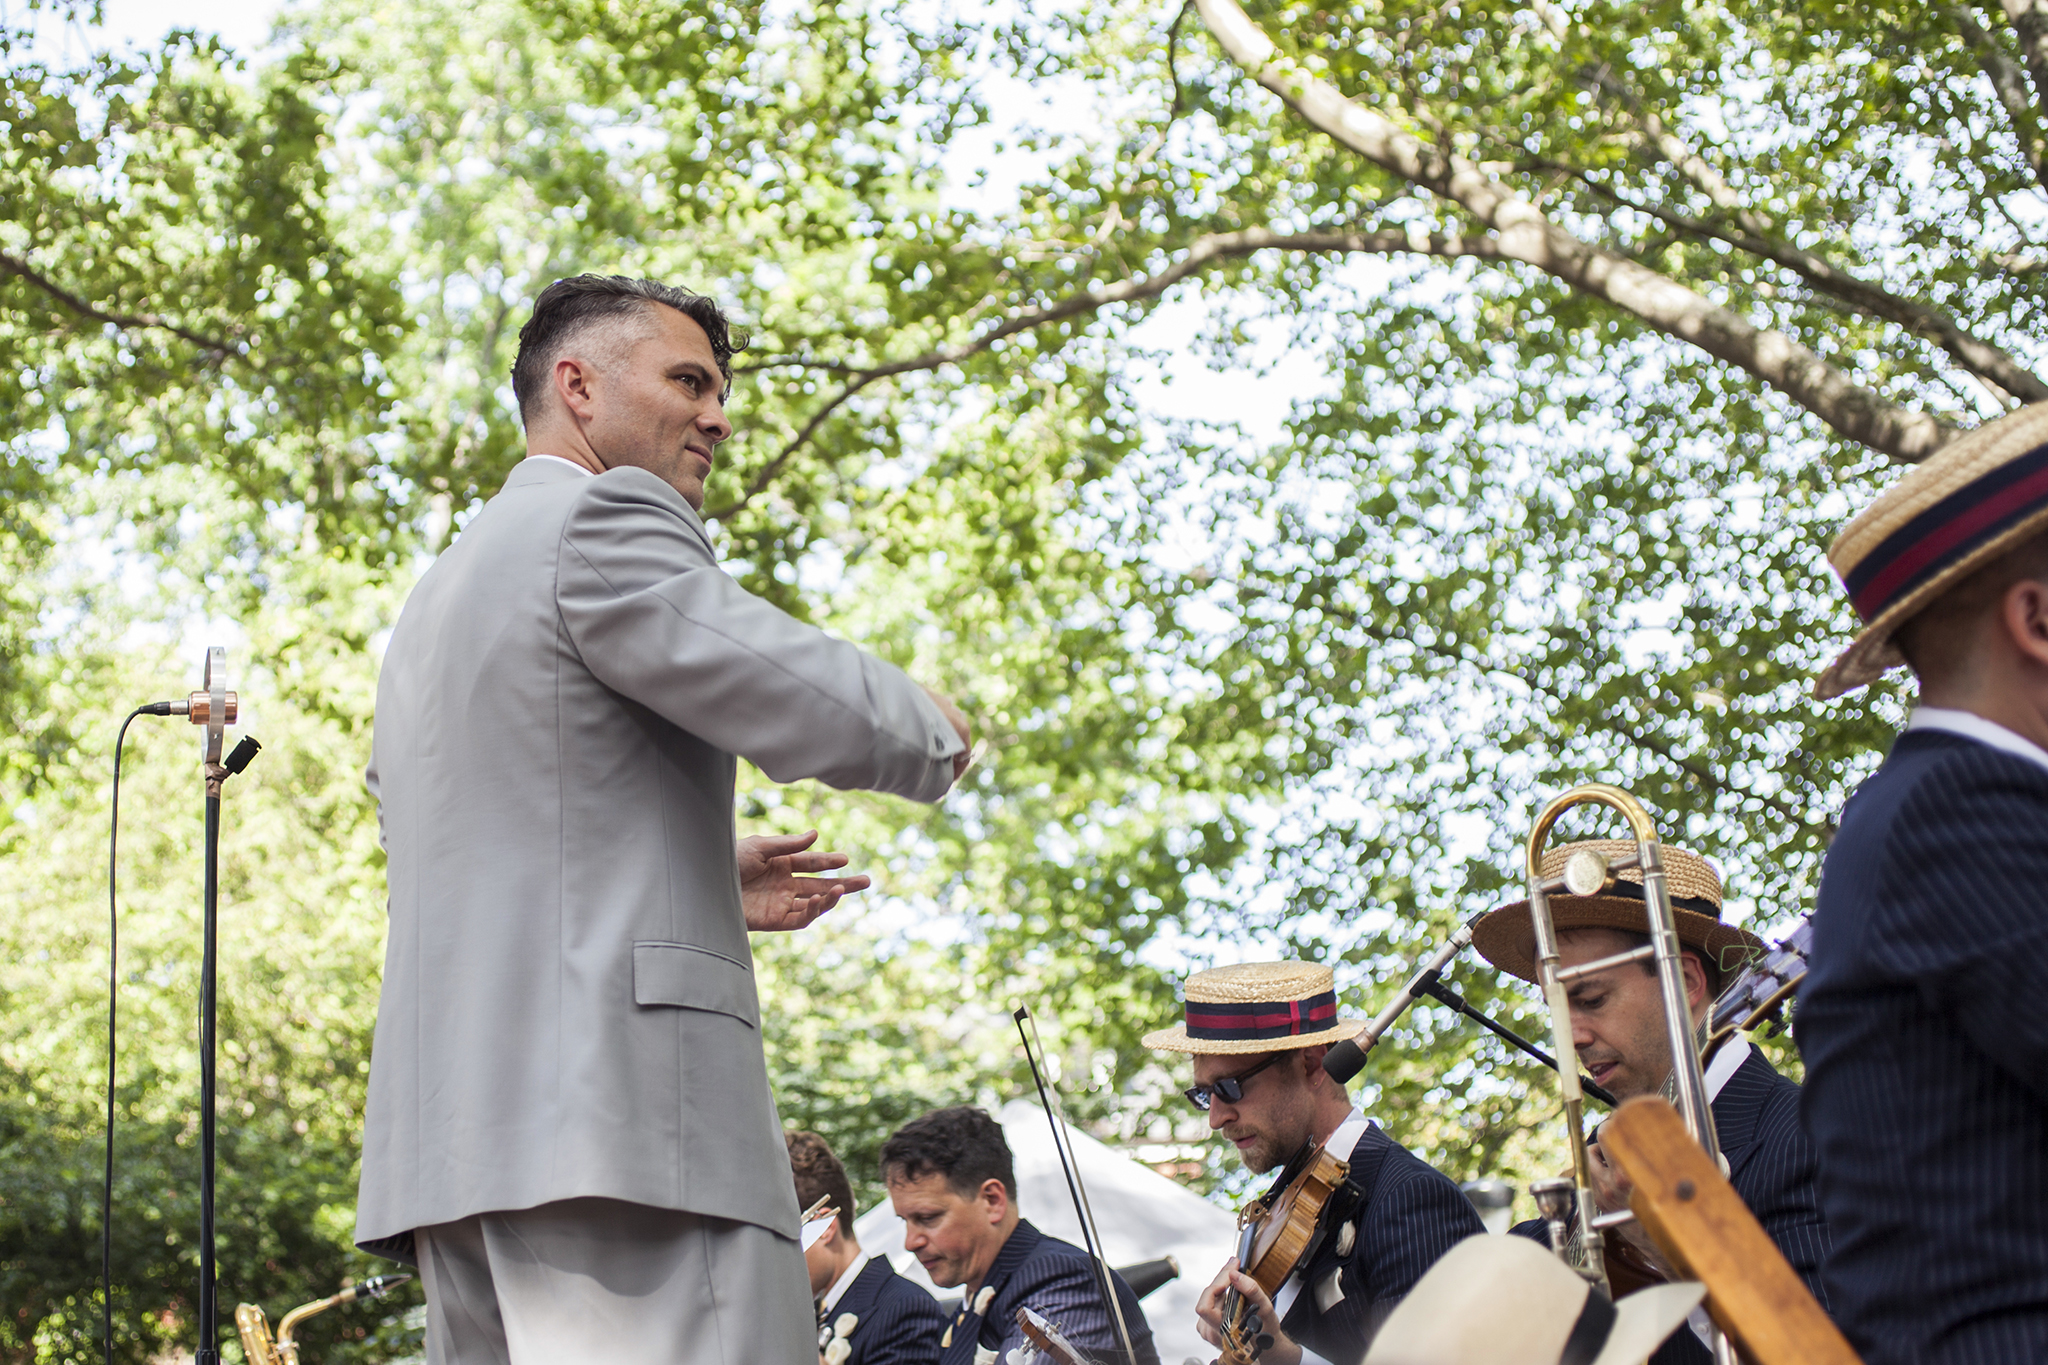 9th Annual Jazz Age Lawn Party